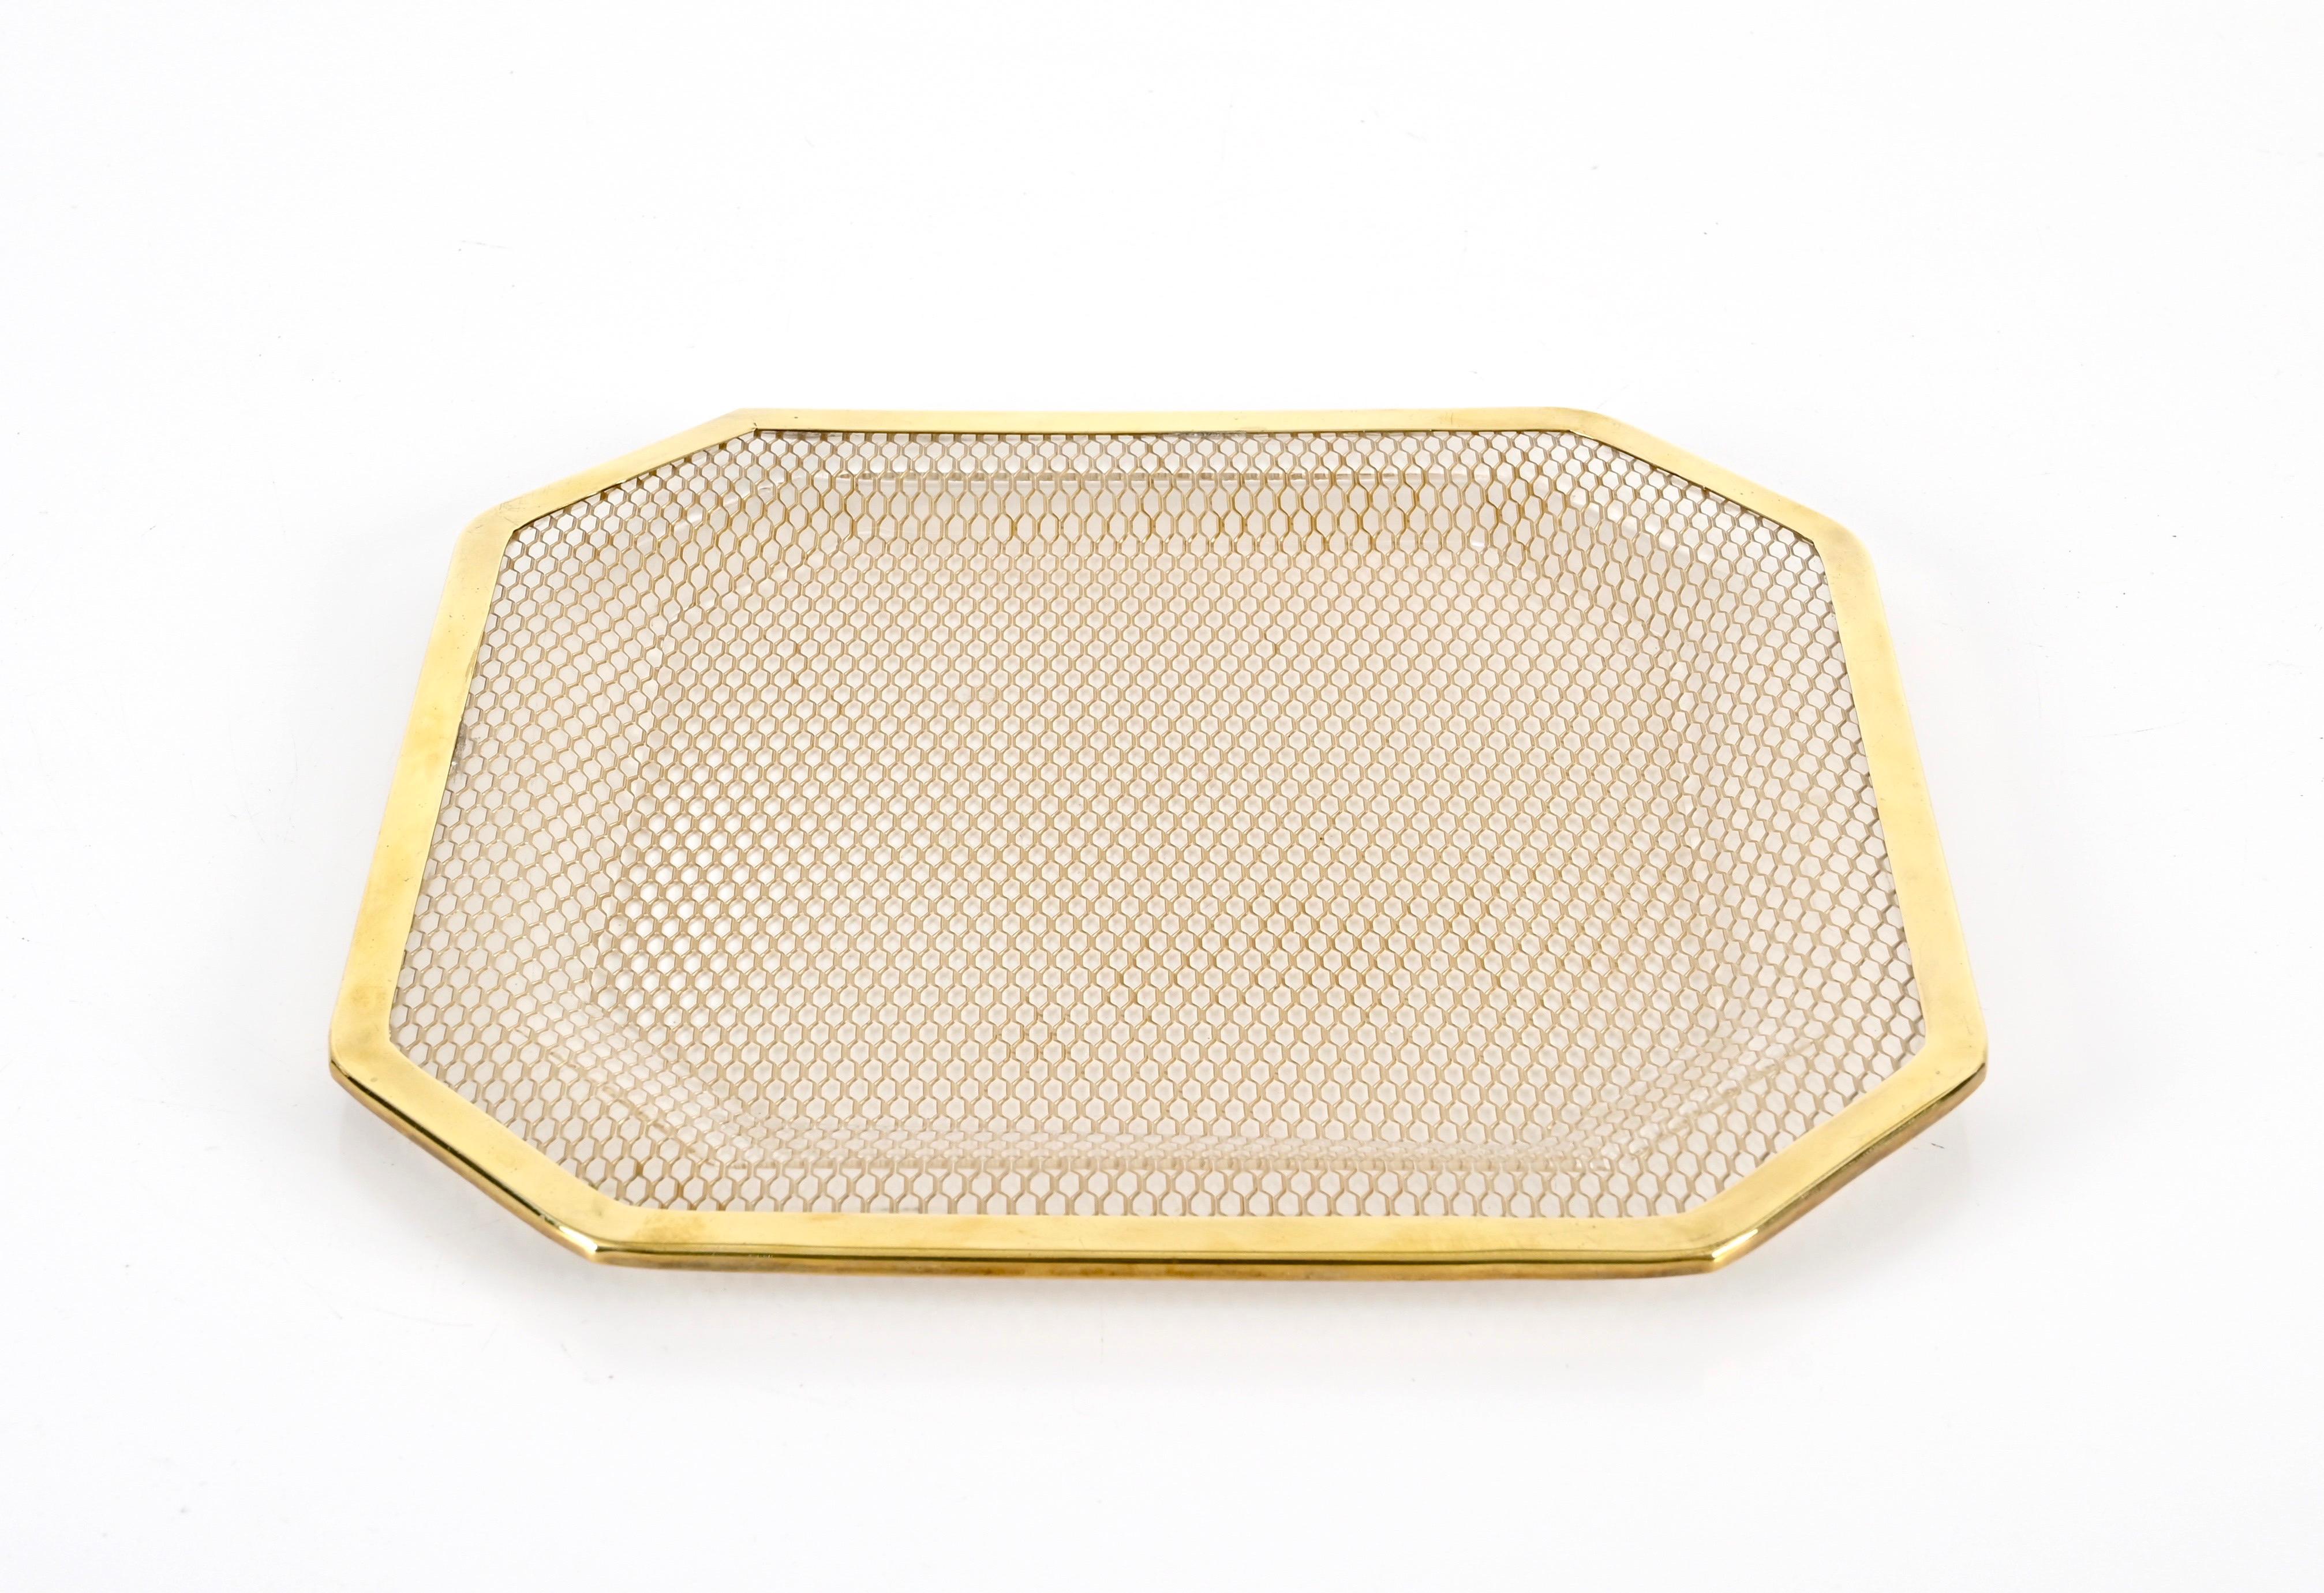 Amazing Mid-Century tray in clear lucite and brass. This fantastic item was designed in Italy in the 1970s and is attributed to Willy Rizzo.

This incredibly elegant centerpiece is unique as the crystal clear lucite is enriched inside by stunning